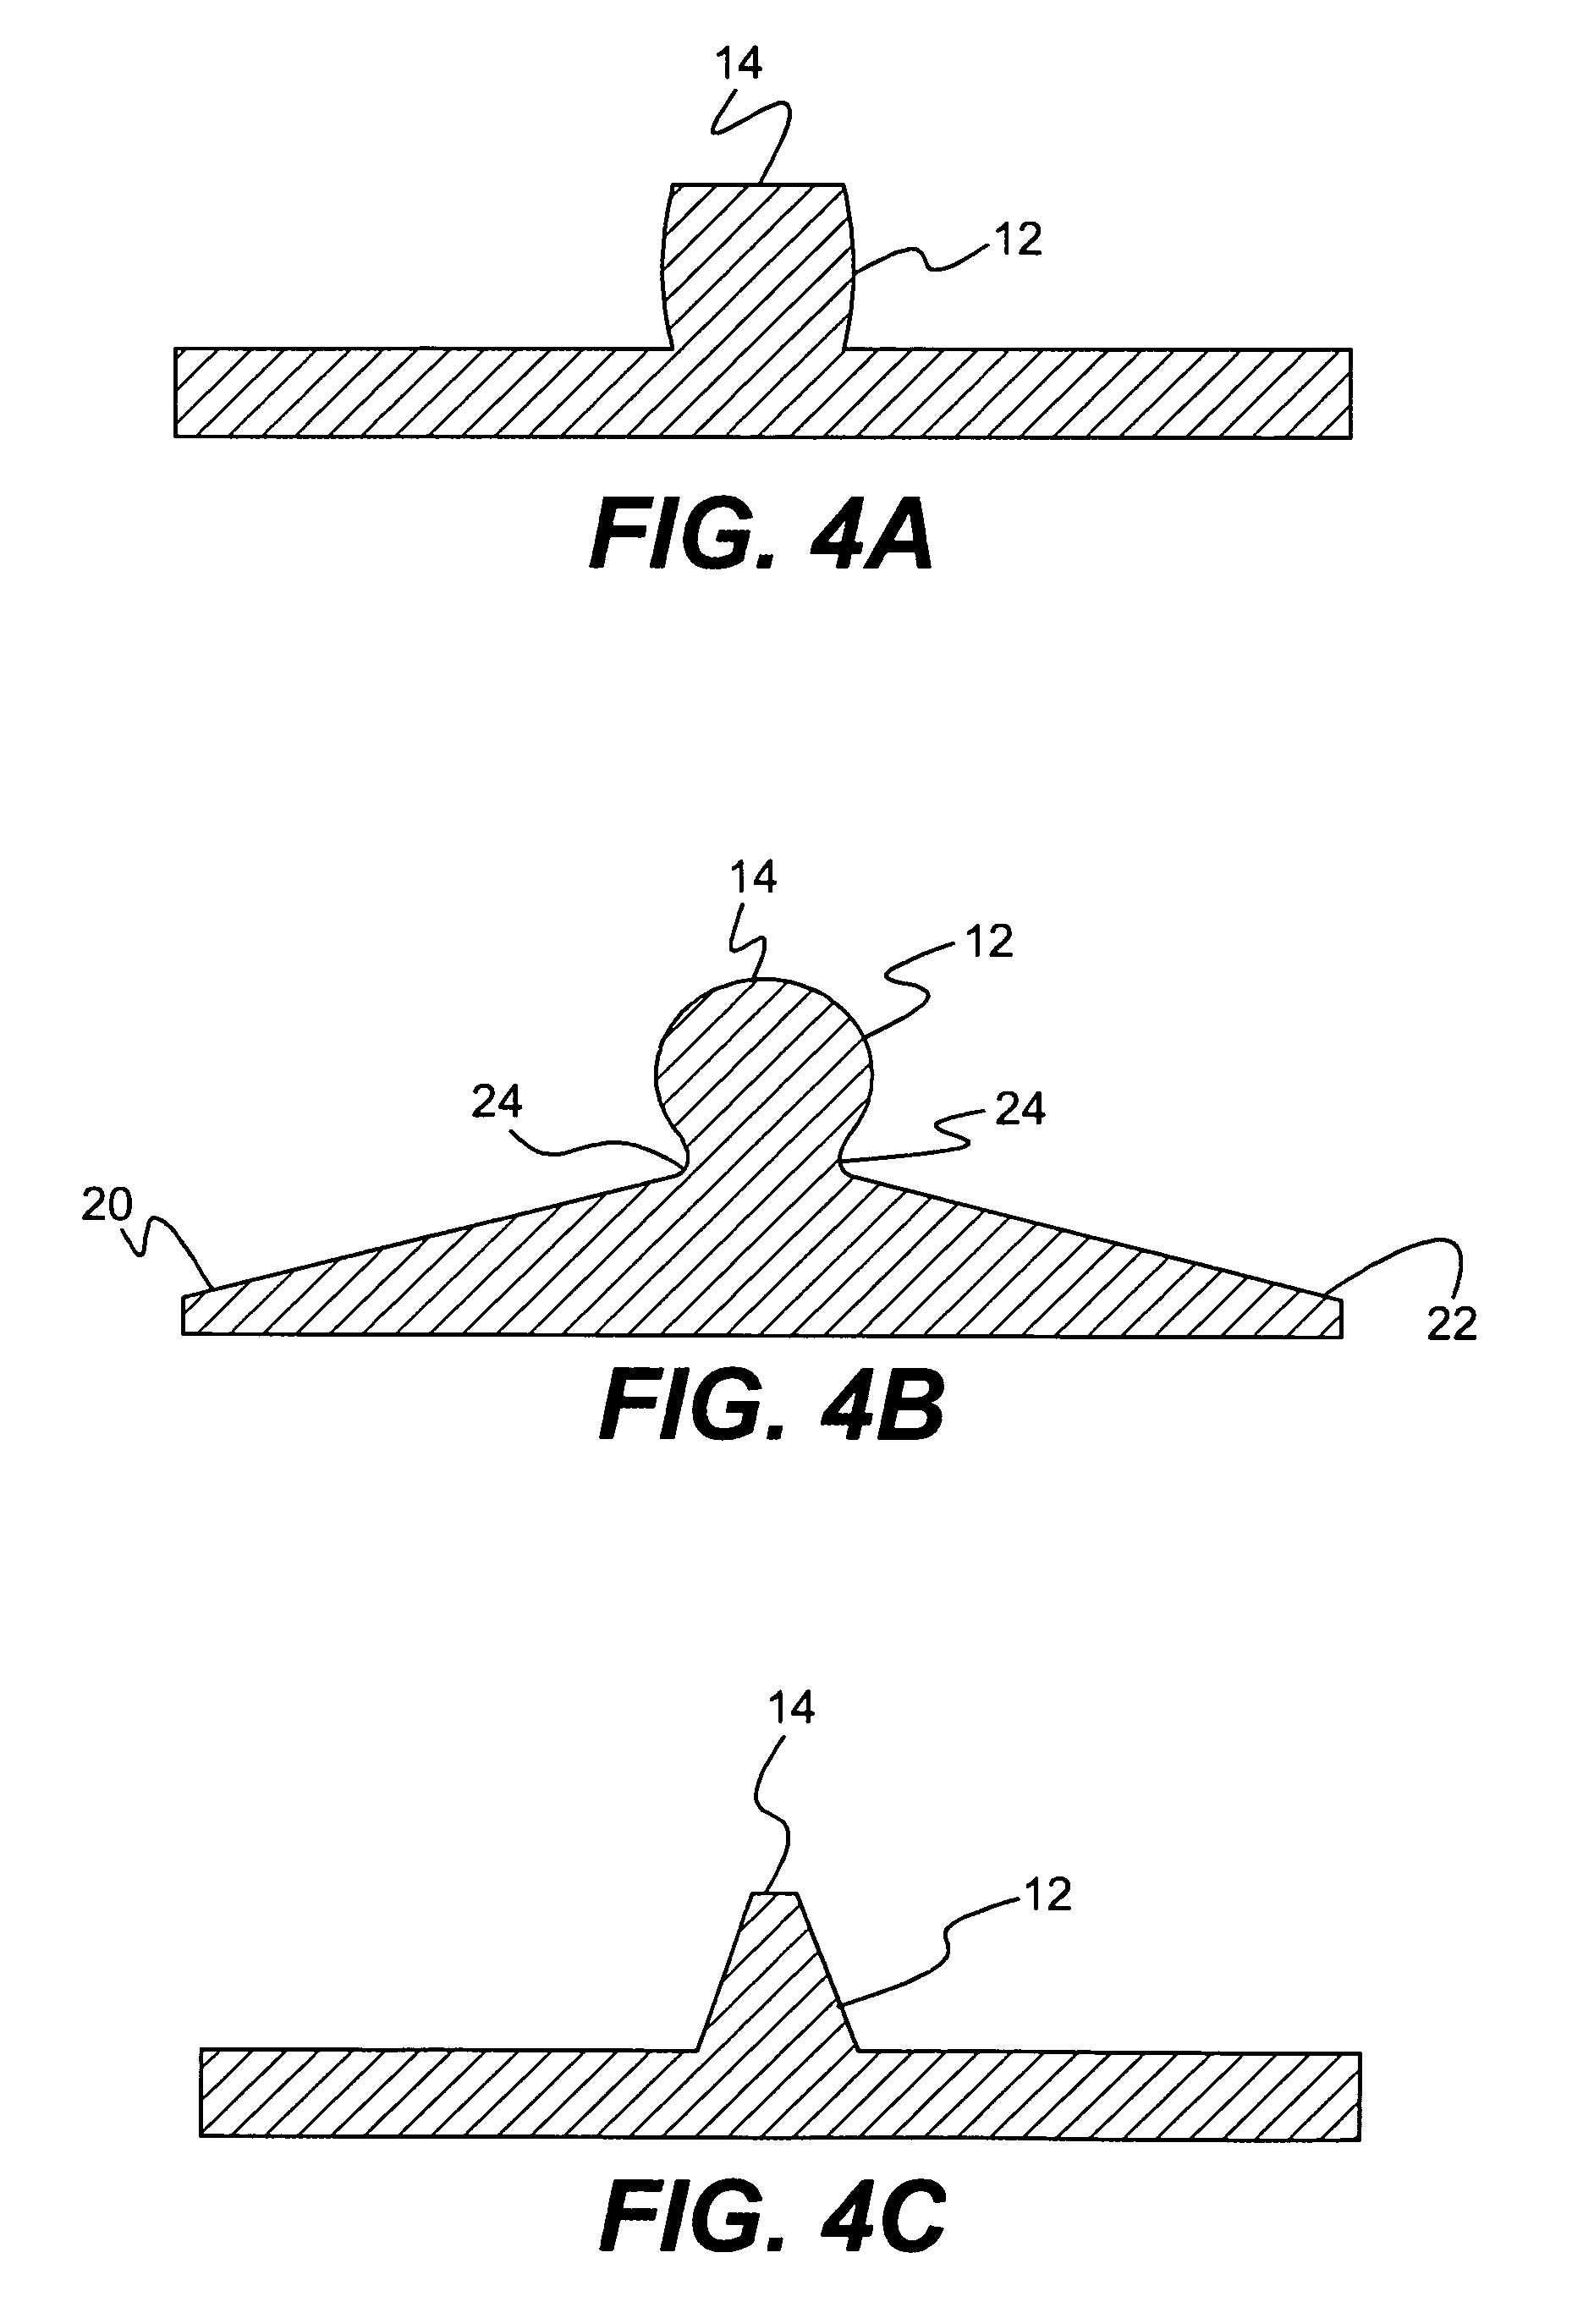 Methods and devices for spinal disc annulus reconstruction and repair